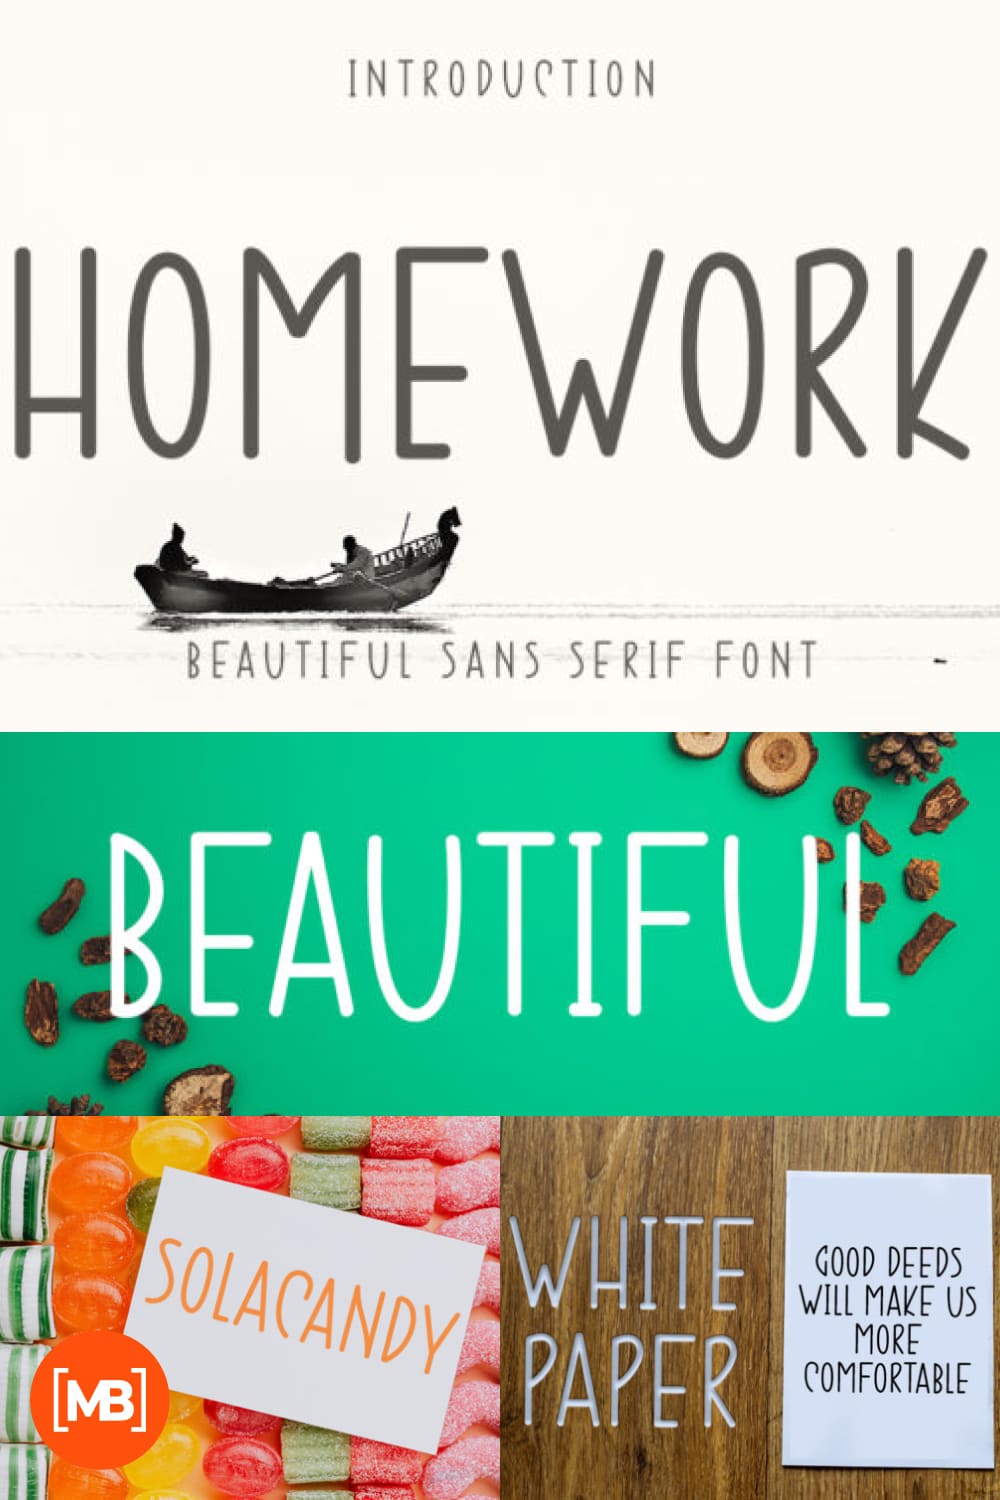 Homework is a simple and thin sans serif font. Add it to your most creative ideas.